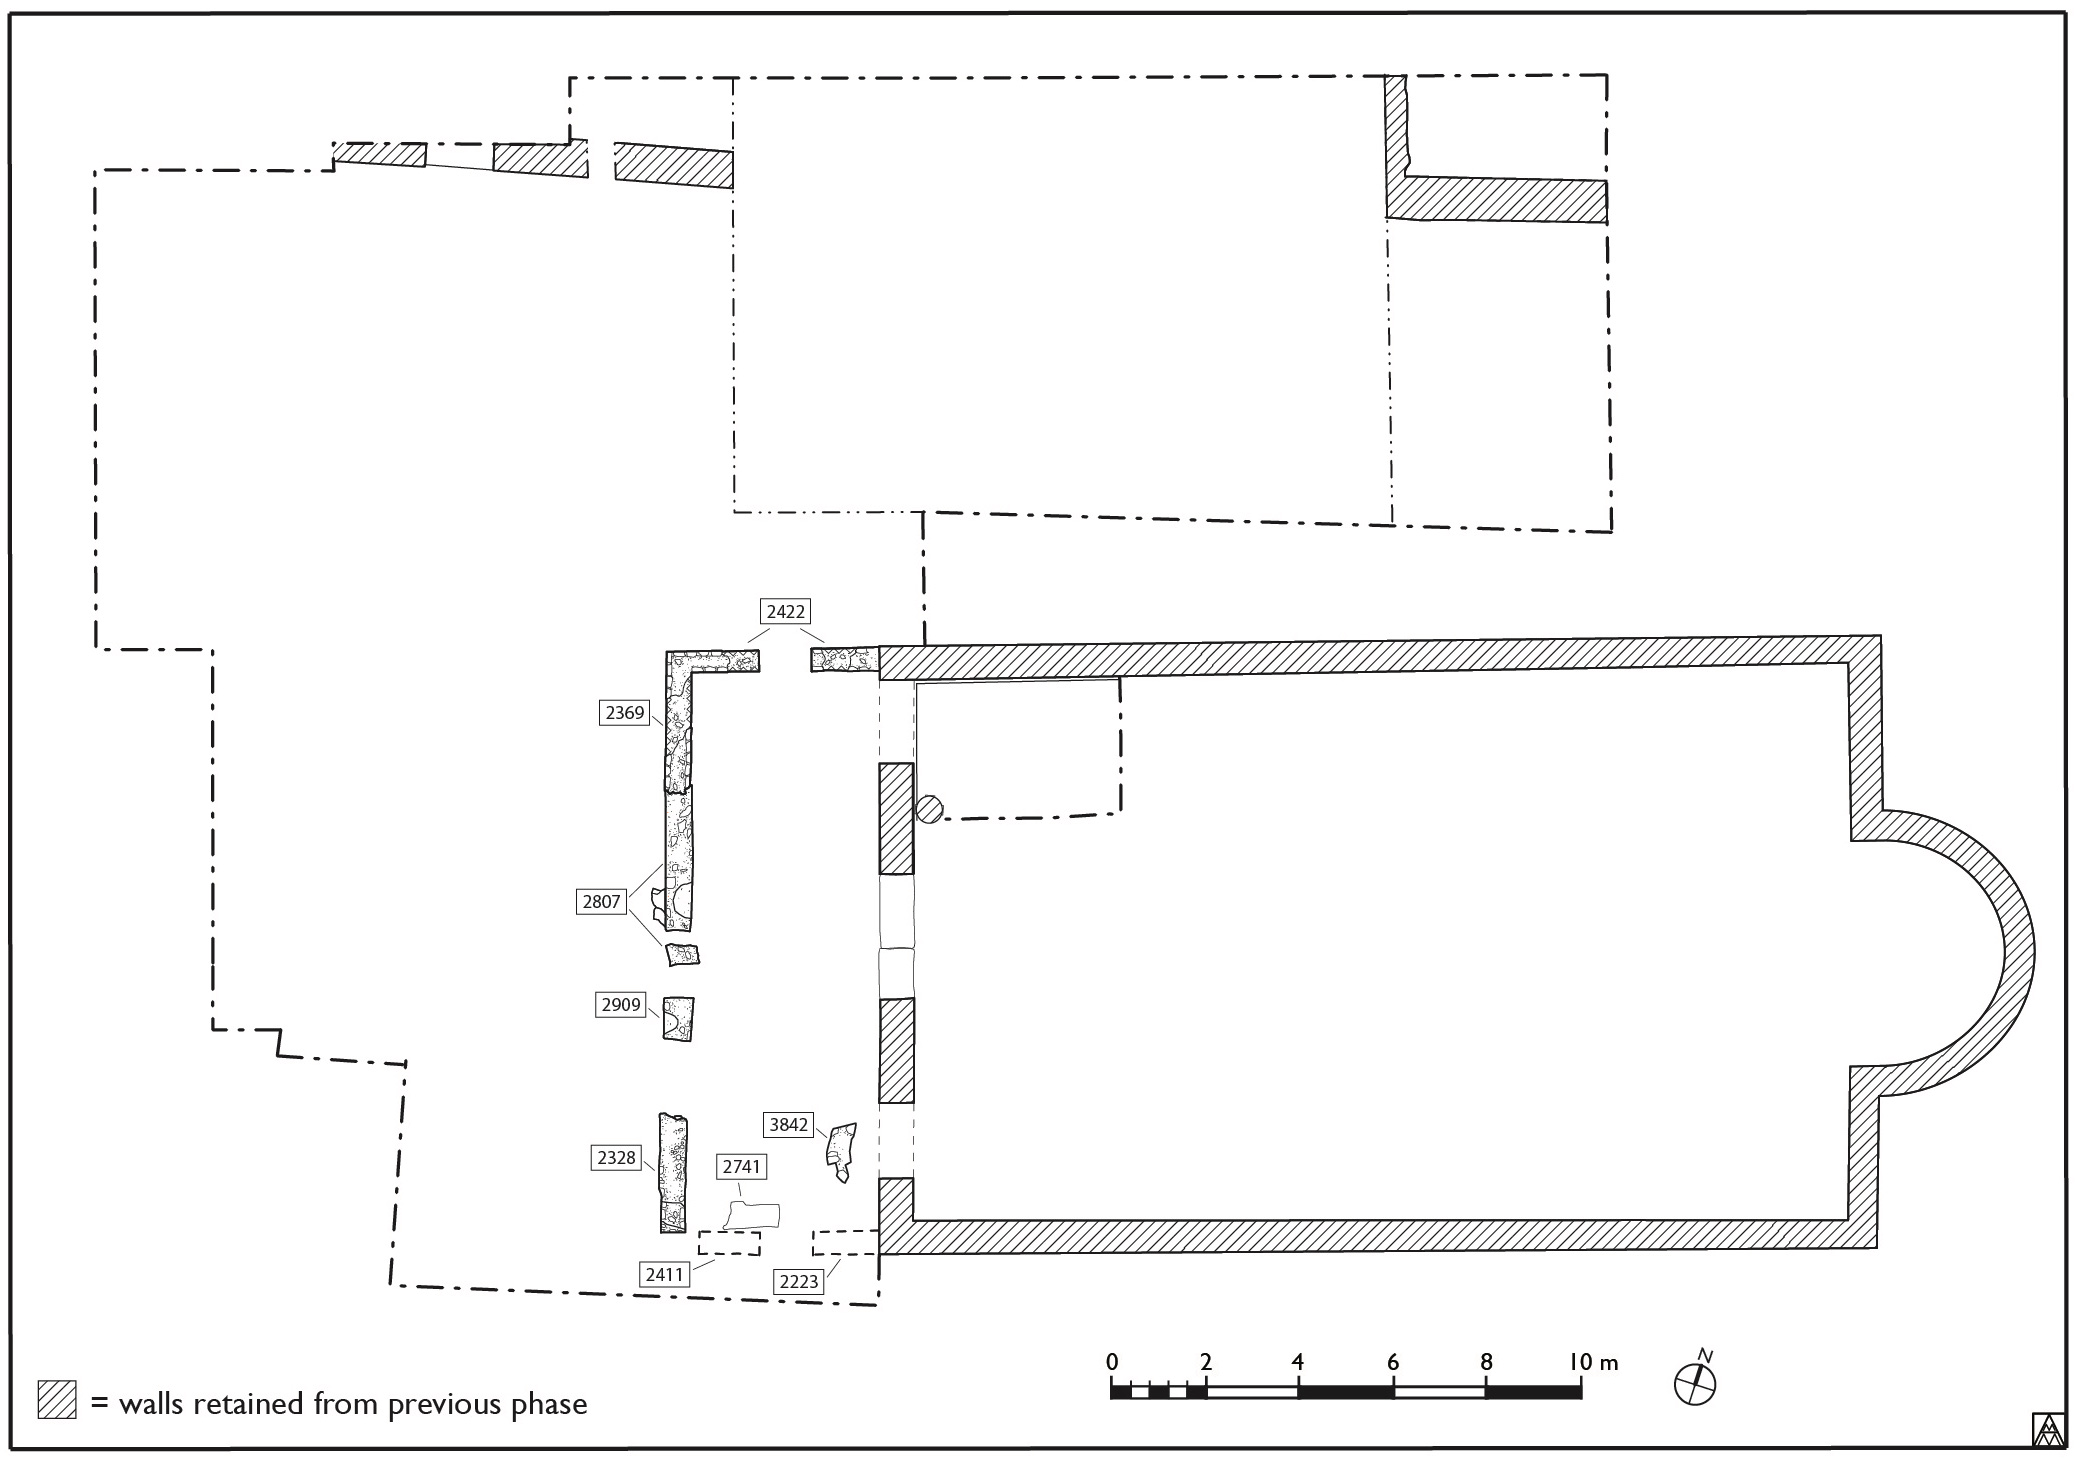 Figure 17. Plan of the late antique church and narthex (Margaret Andrews).